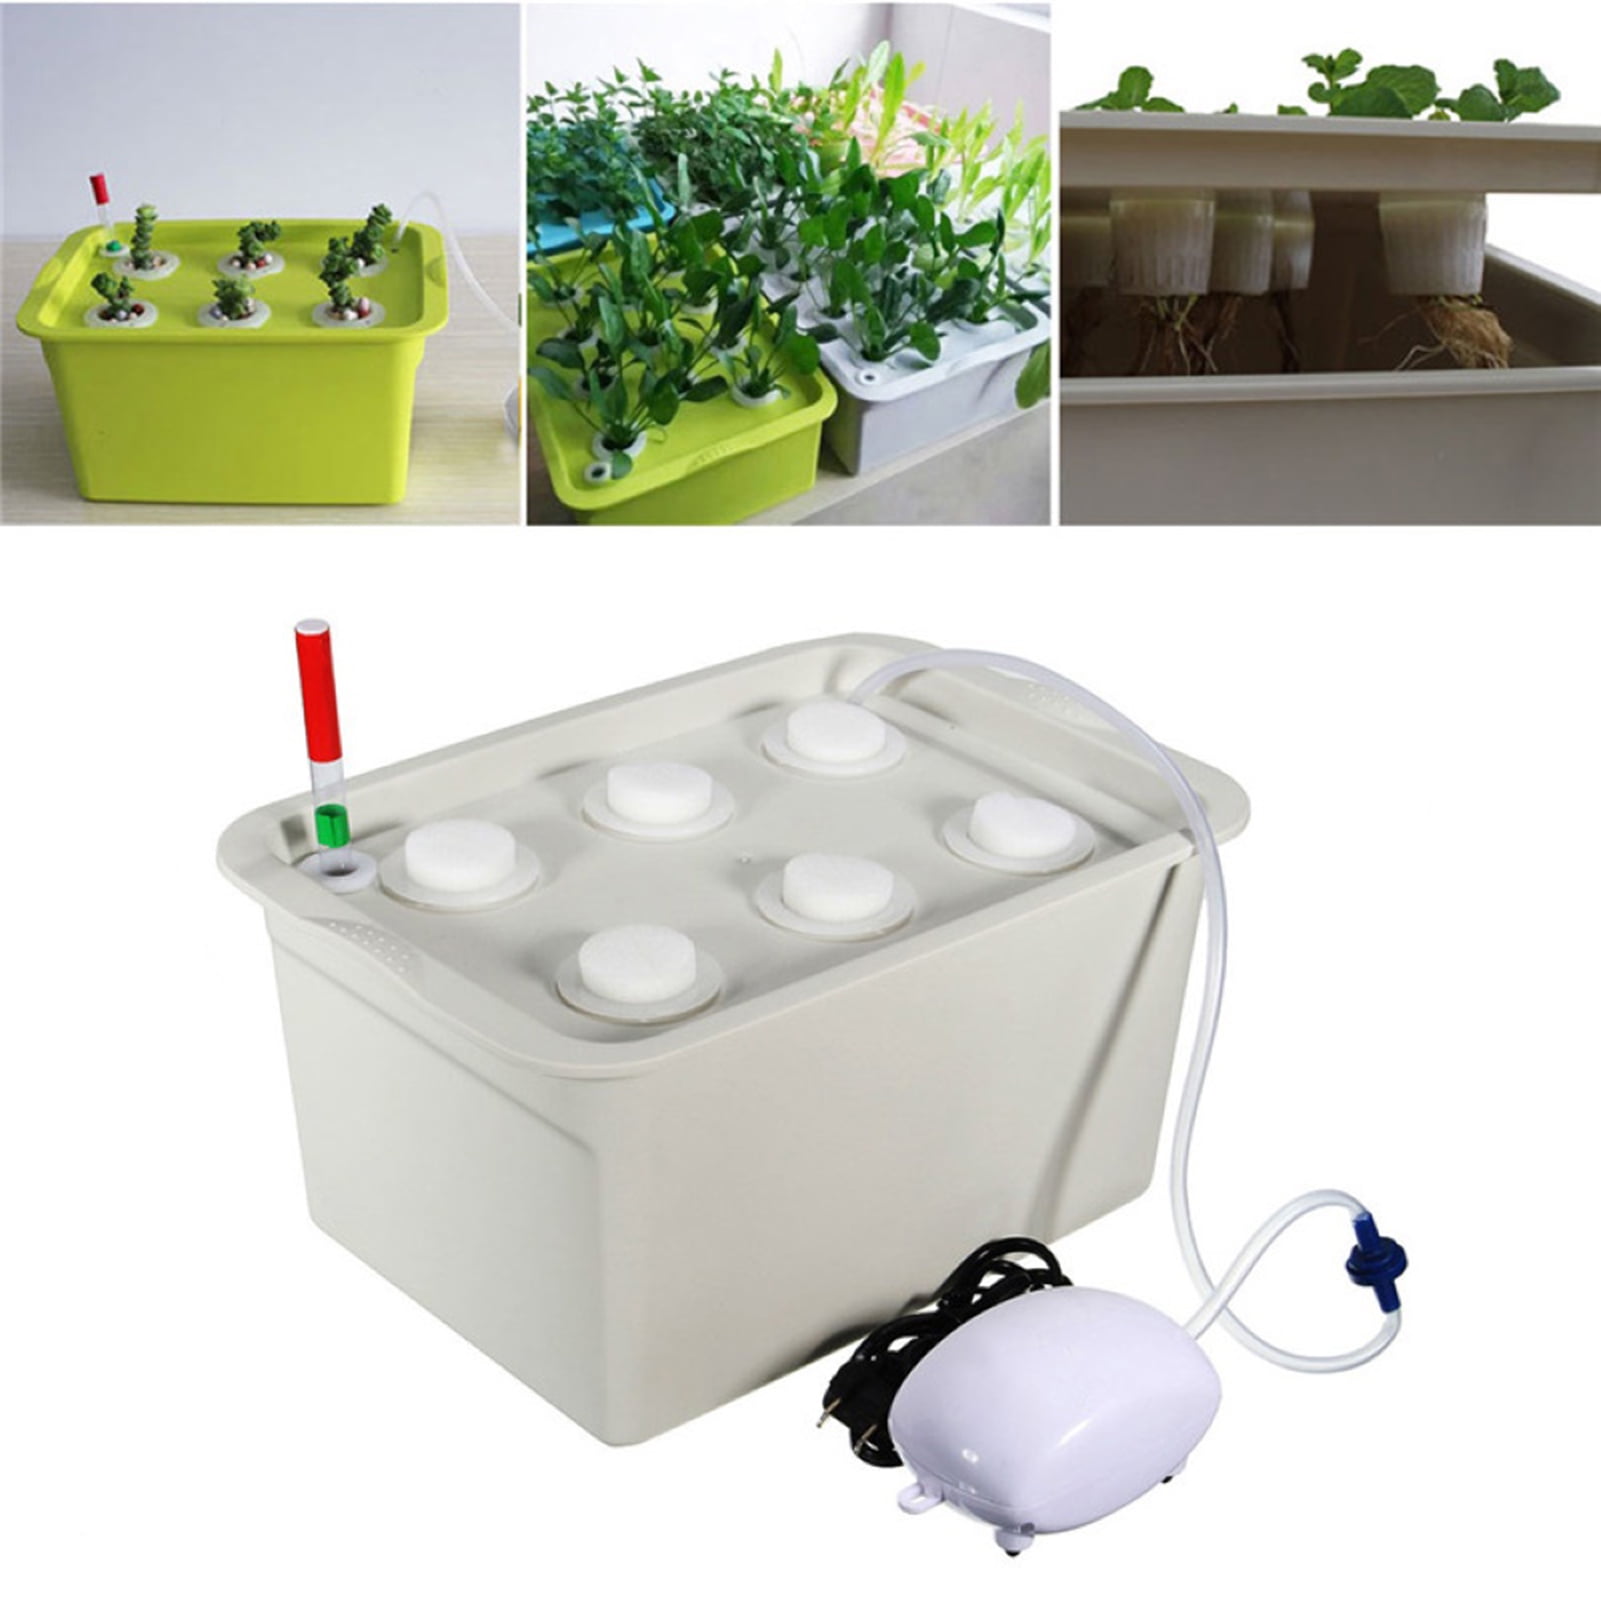 6 PLANT SITE HYDROPONIC GROW KIT SYSTEM BUBBLE TUB WATER CULTURE BOXS INDOOR 